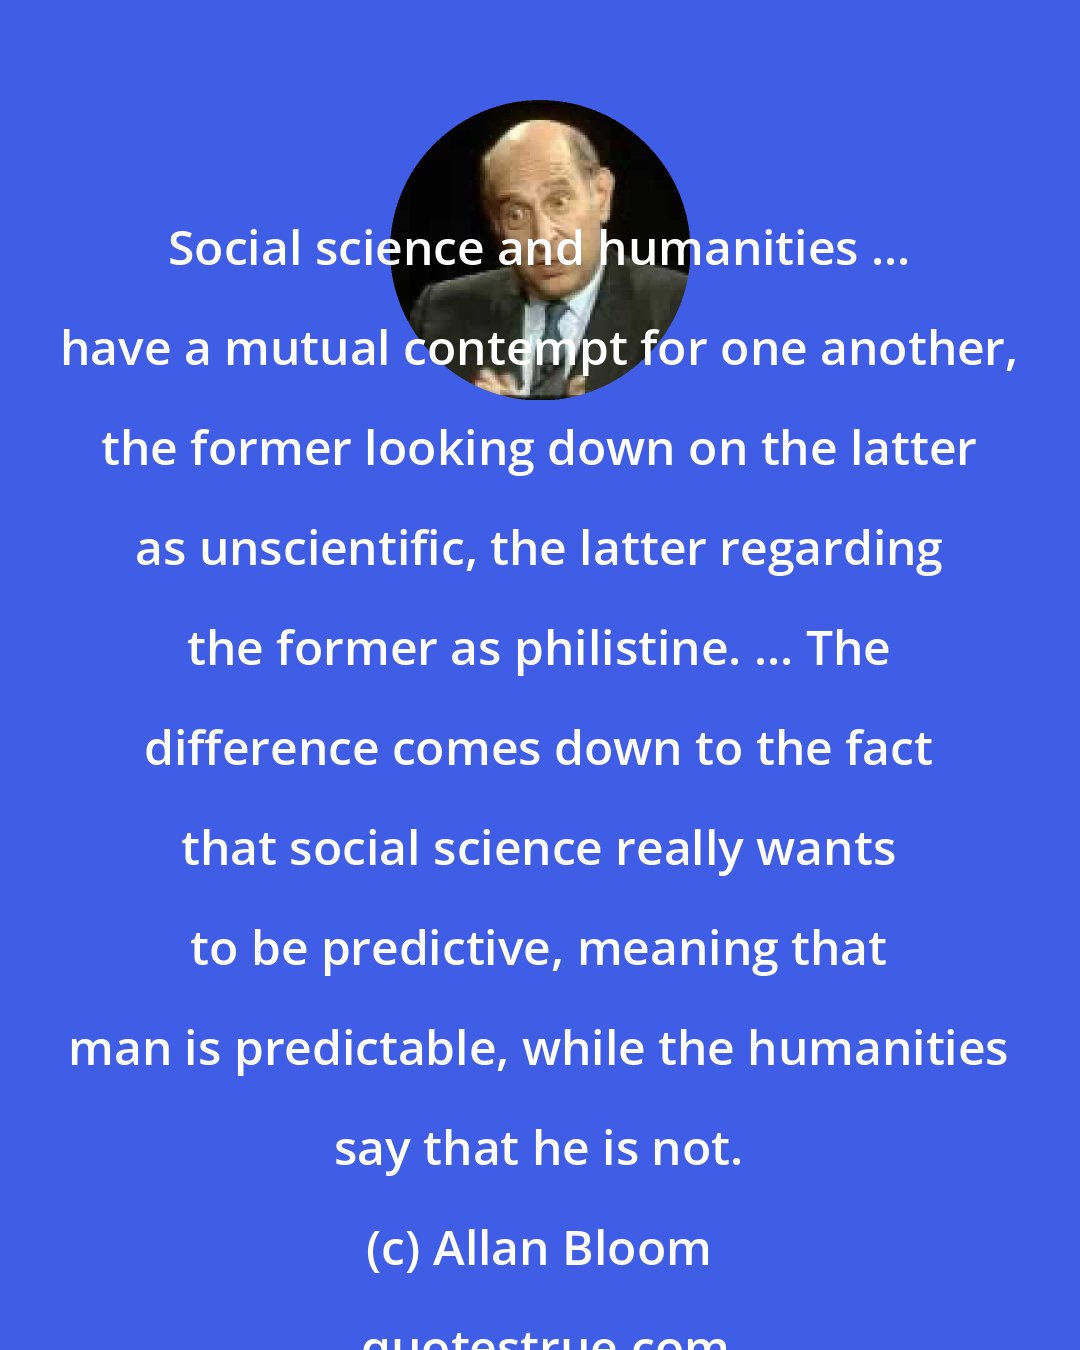 Allan Bloom: Social science and humanities ... have a mutual contempt for one another, the former looking down on the latter as unscientific, the latter regarding the former as philistine. ... The difference comes down to the fact that social science really wants to be predictive, meaning that man is predictable, while the humanities say that he is not.